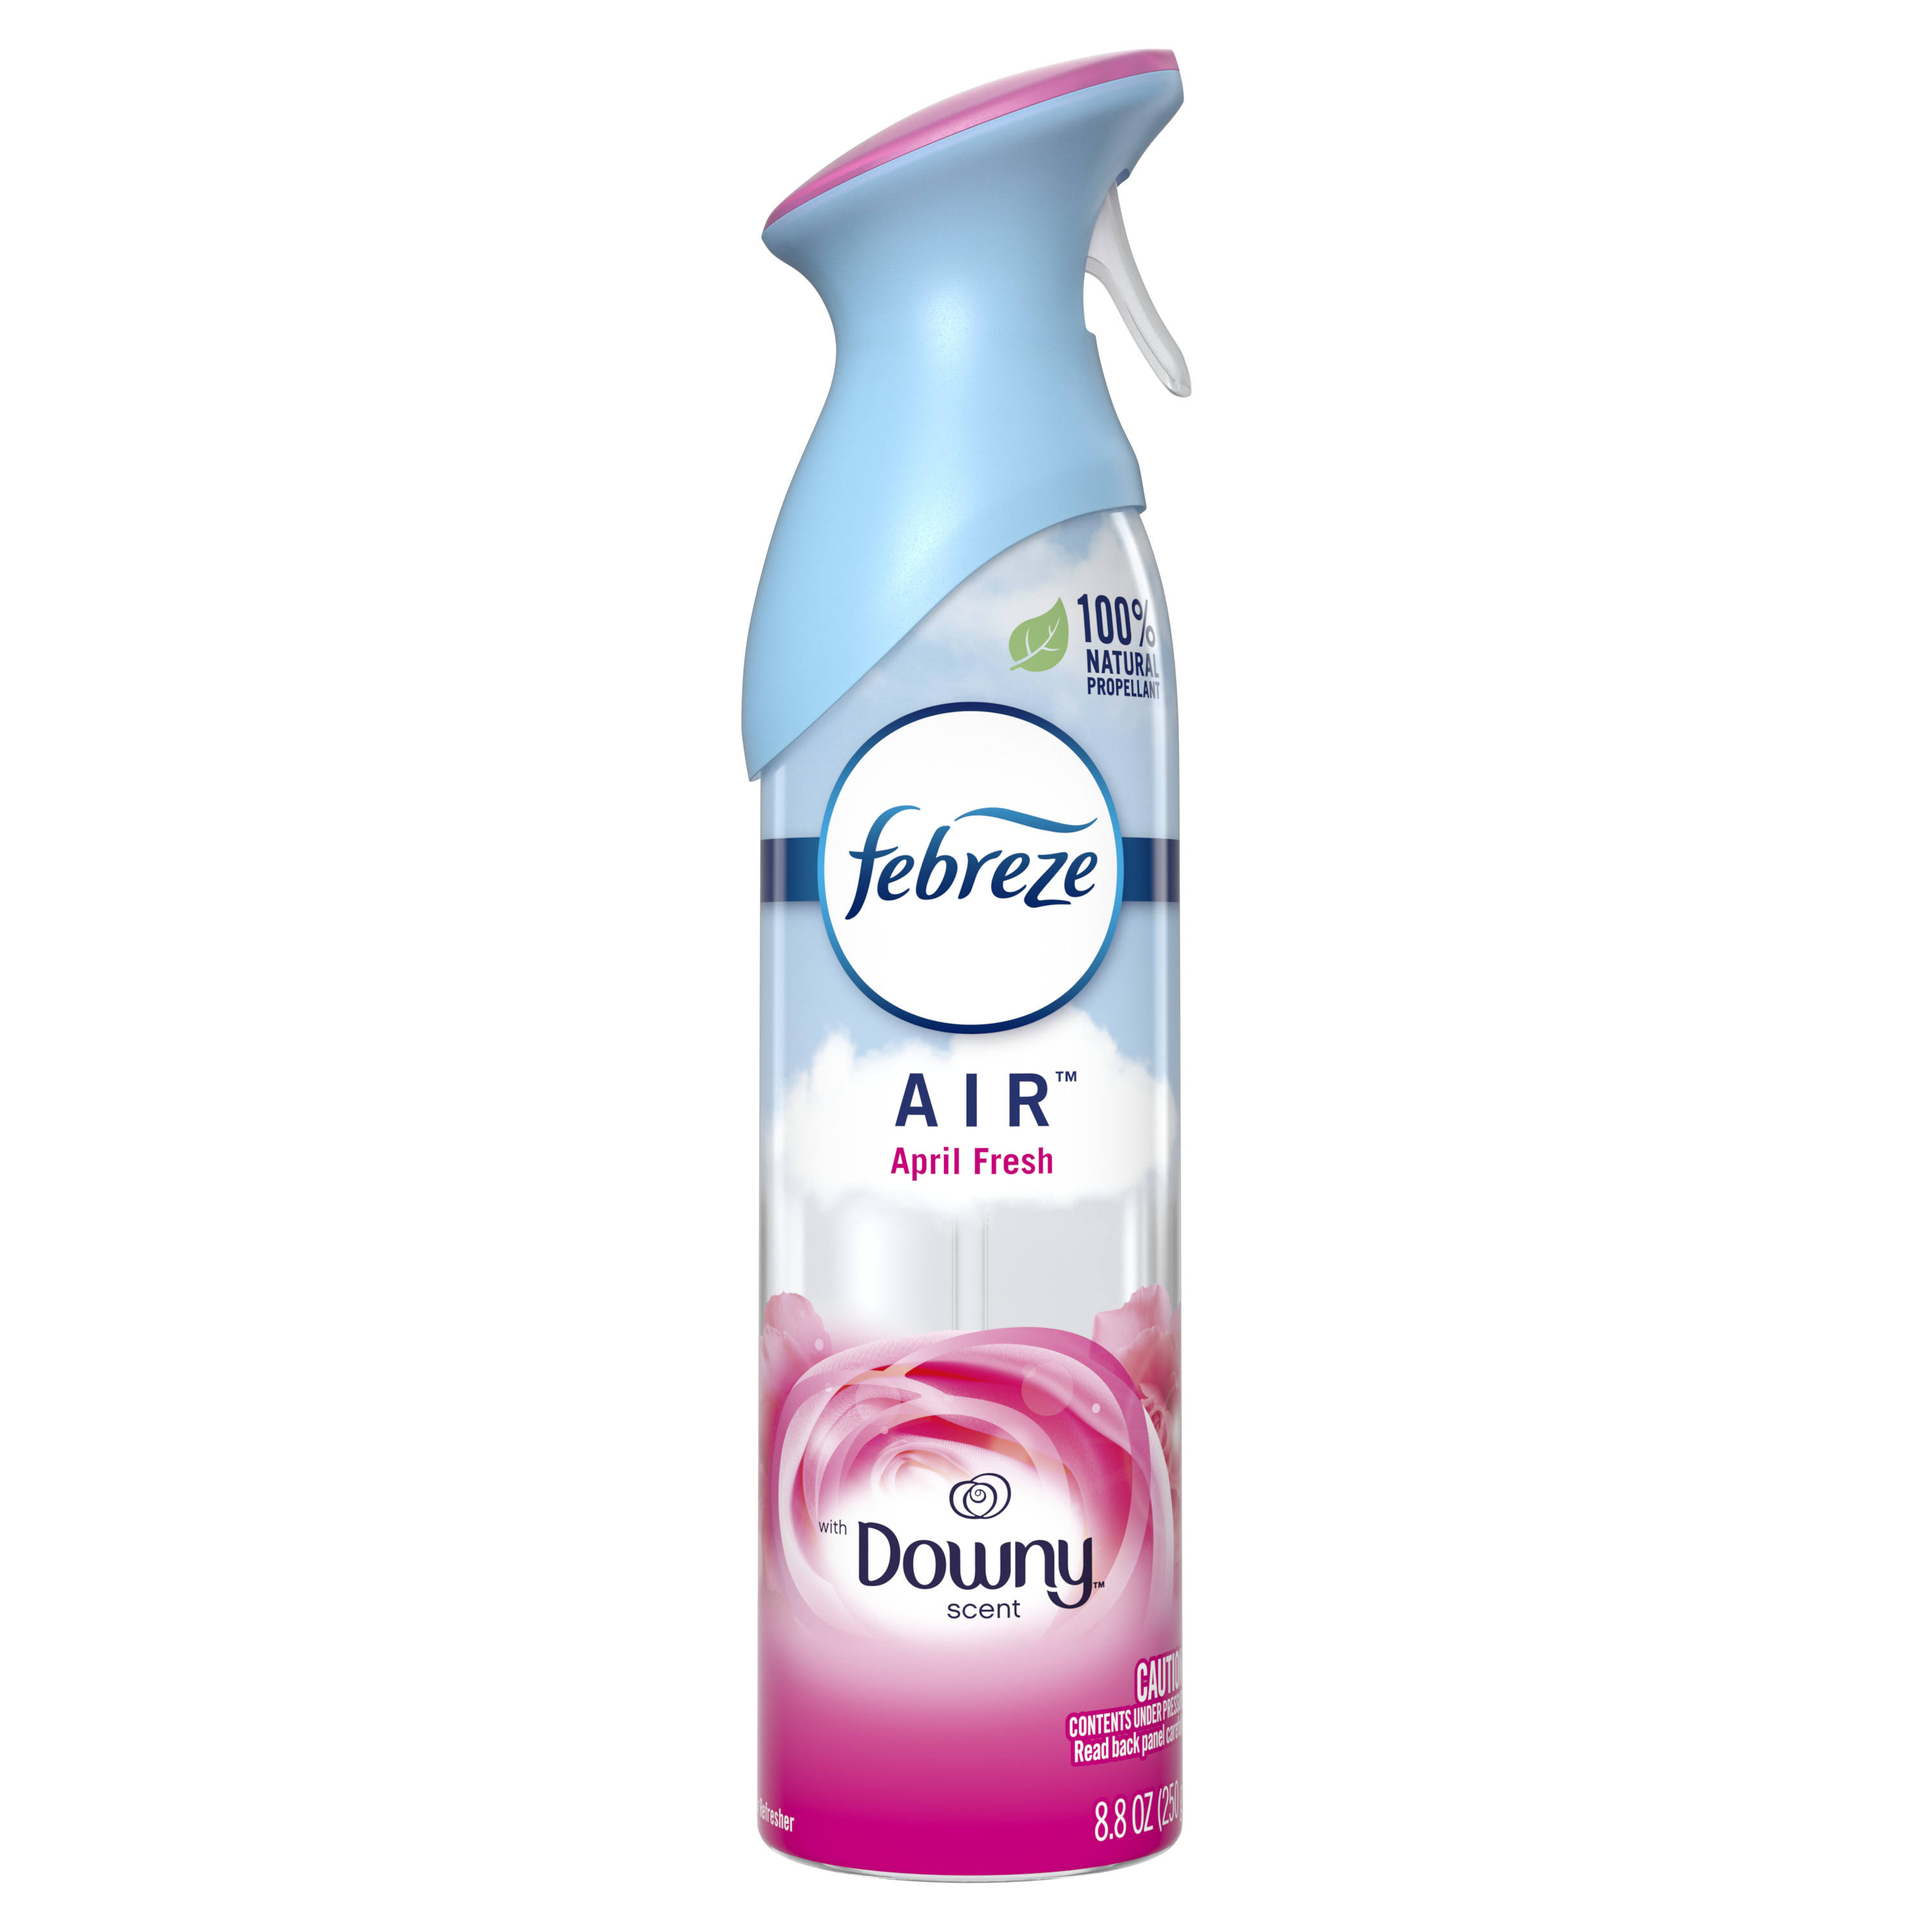 Febreze Air with Downy Scent April Fresh Air Refresher - 8.8 oz